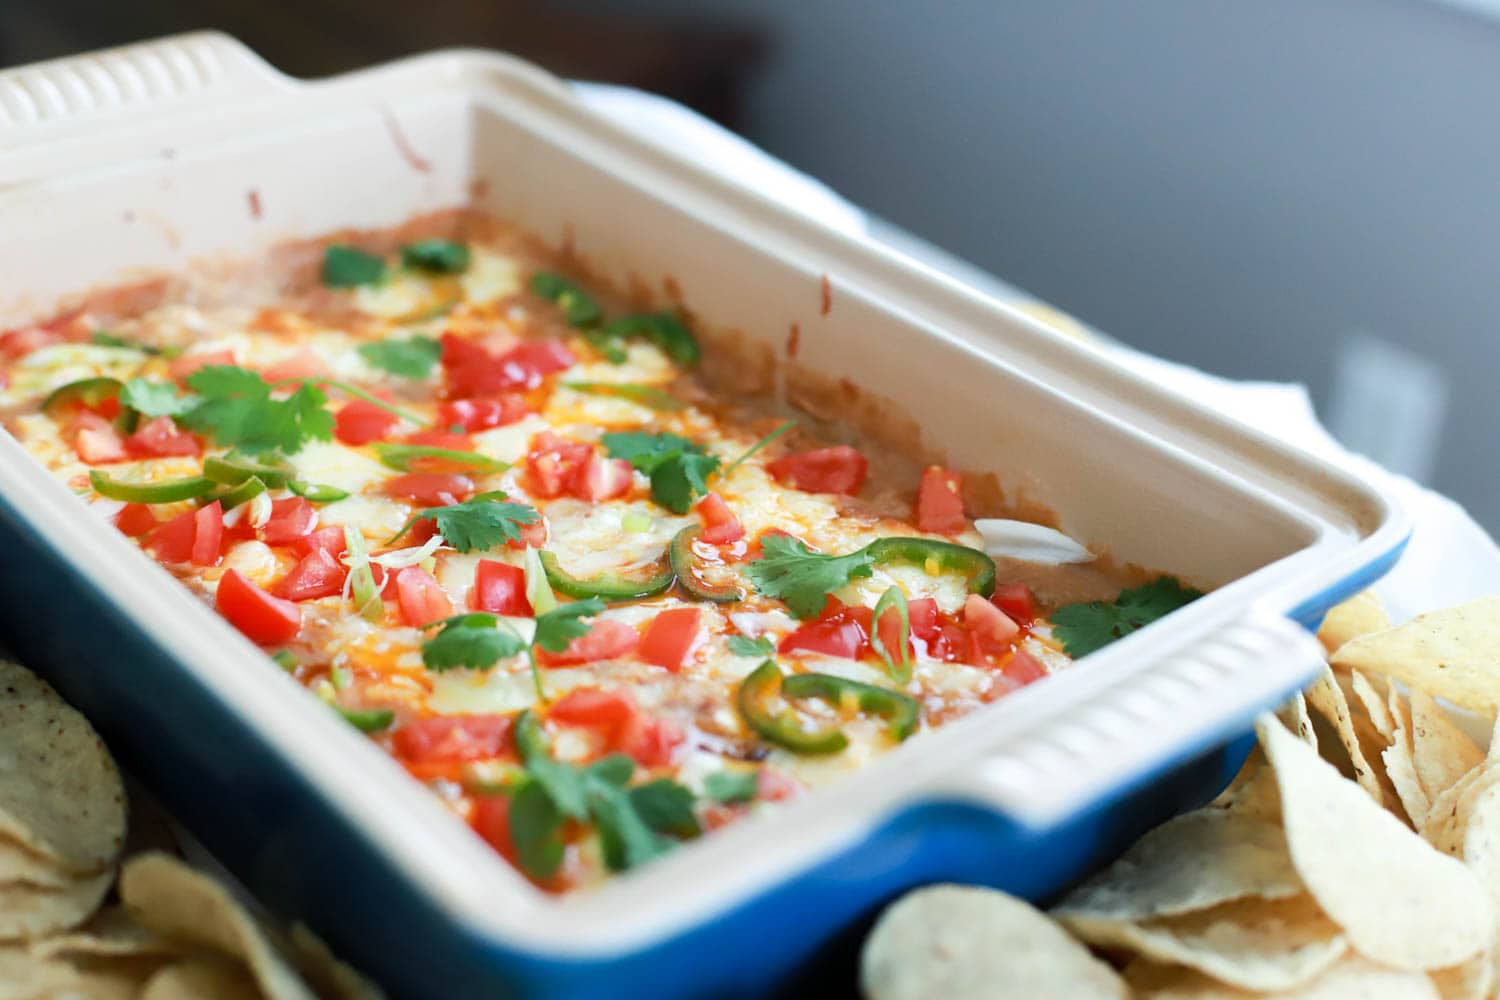 Blue baking dish of hot bean dip topped with cilantro and tomatoes.